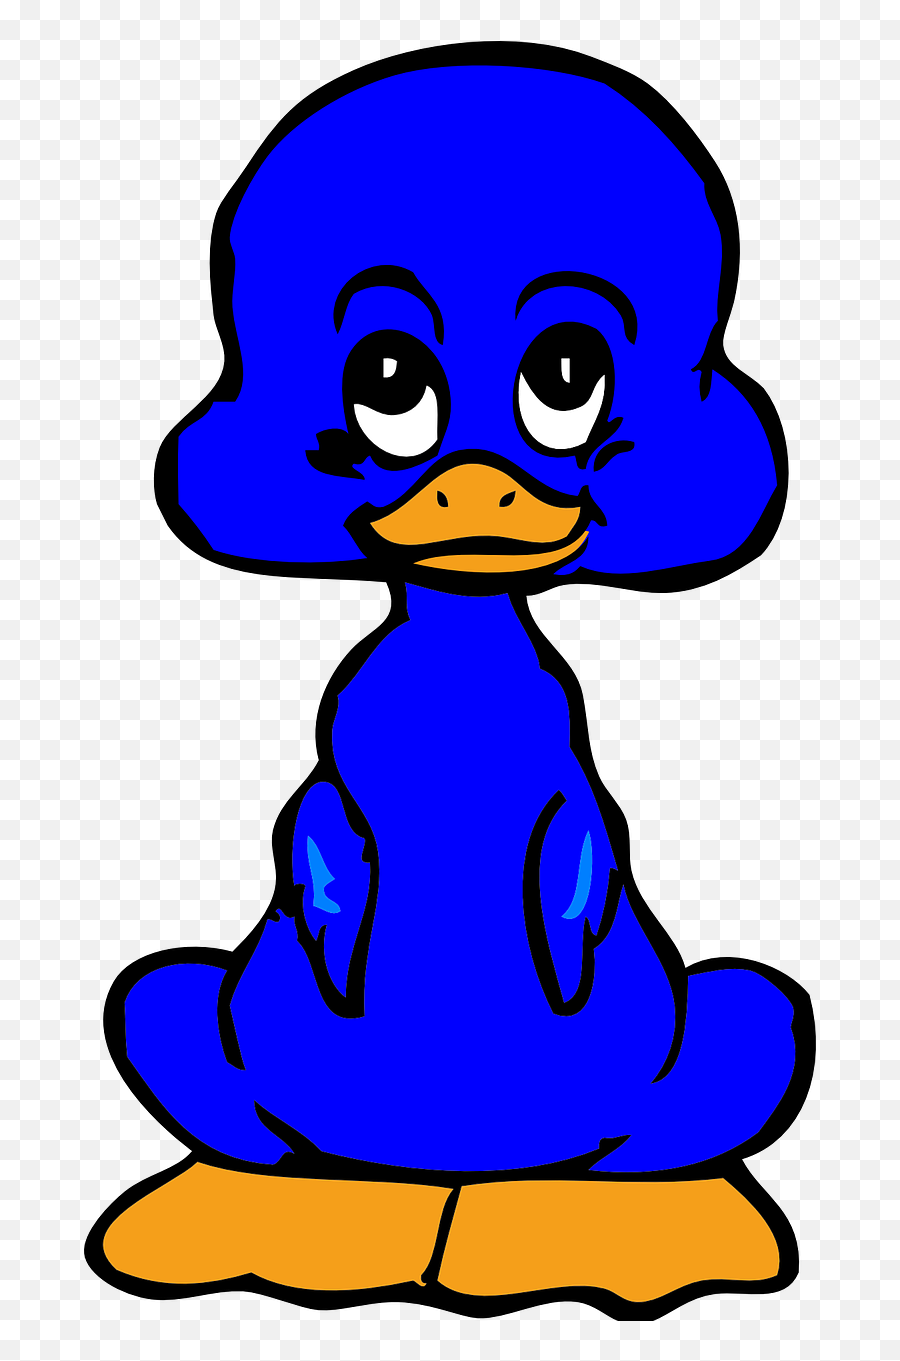 Duckling Blue Cute - Free Vector Graphic On Pixabay Emoji,Ducklings Clipart